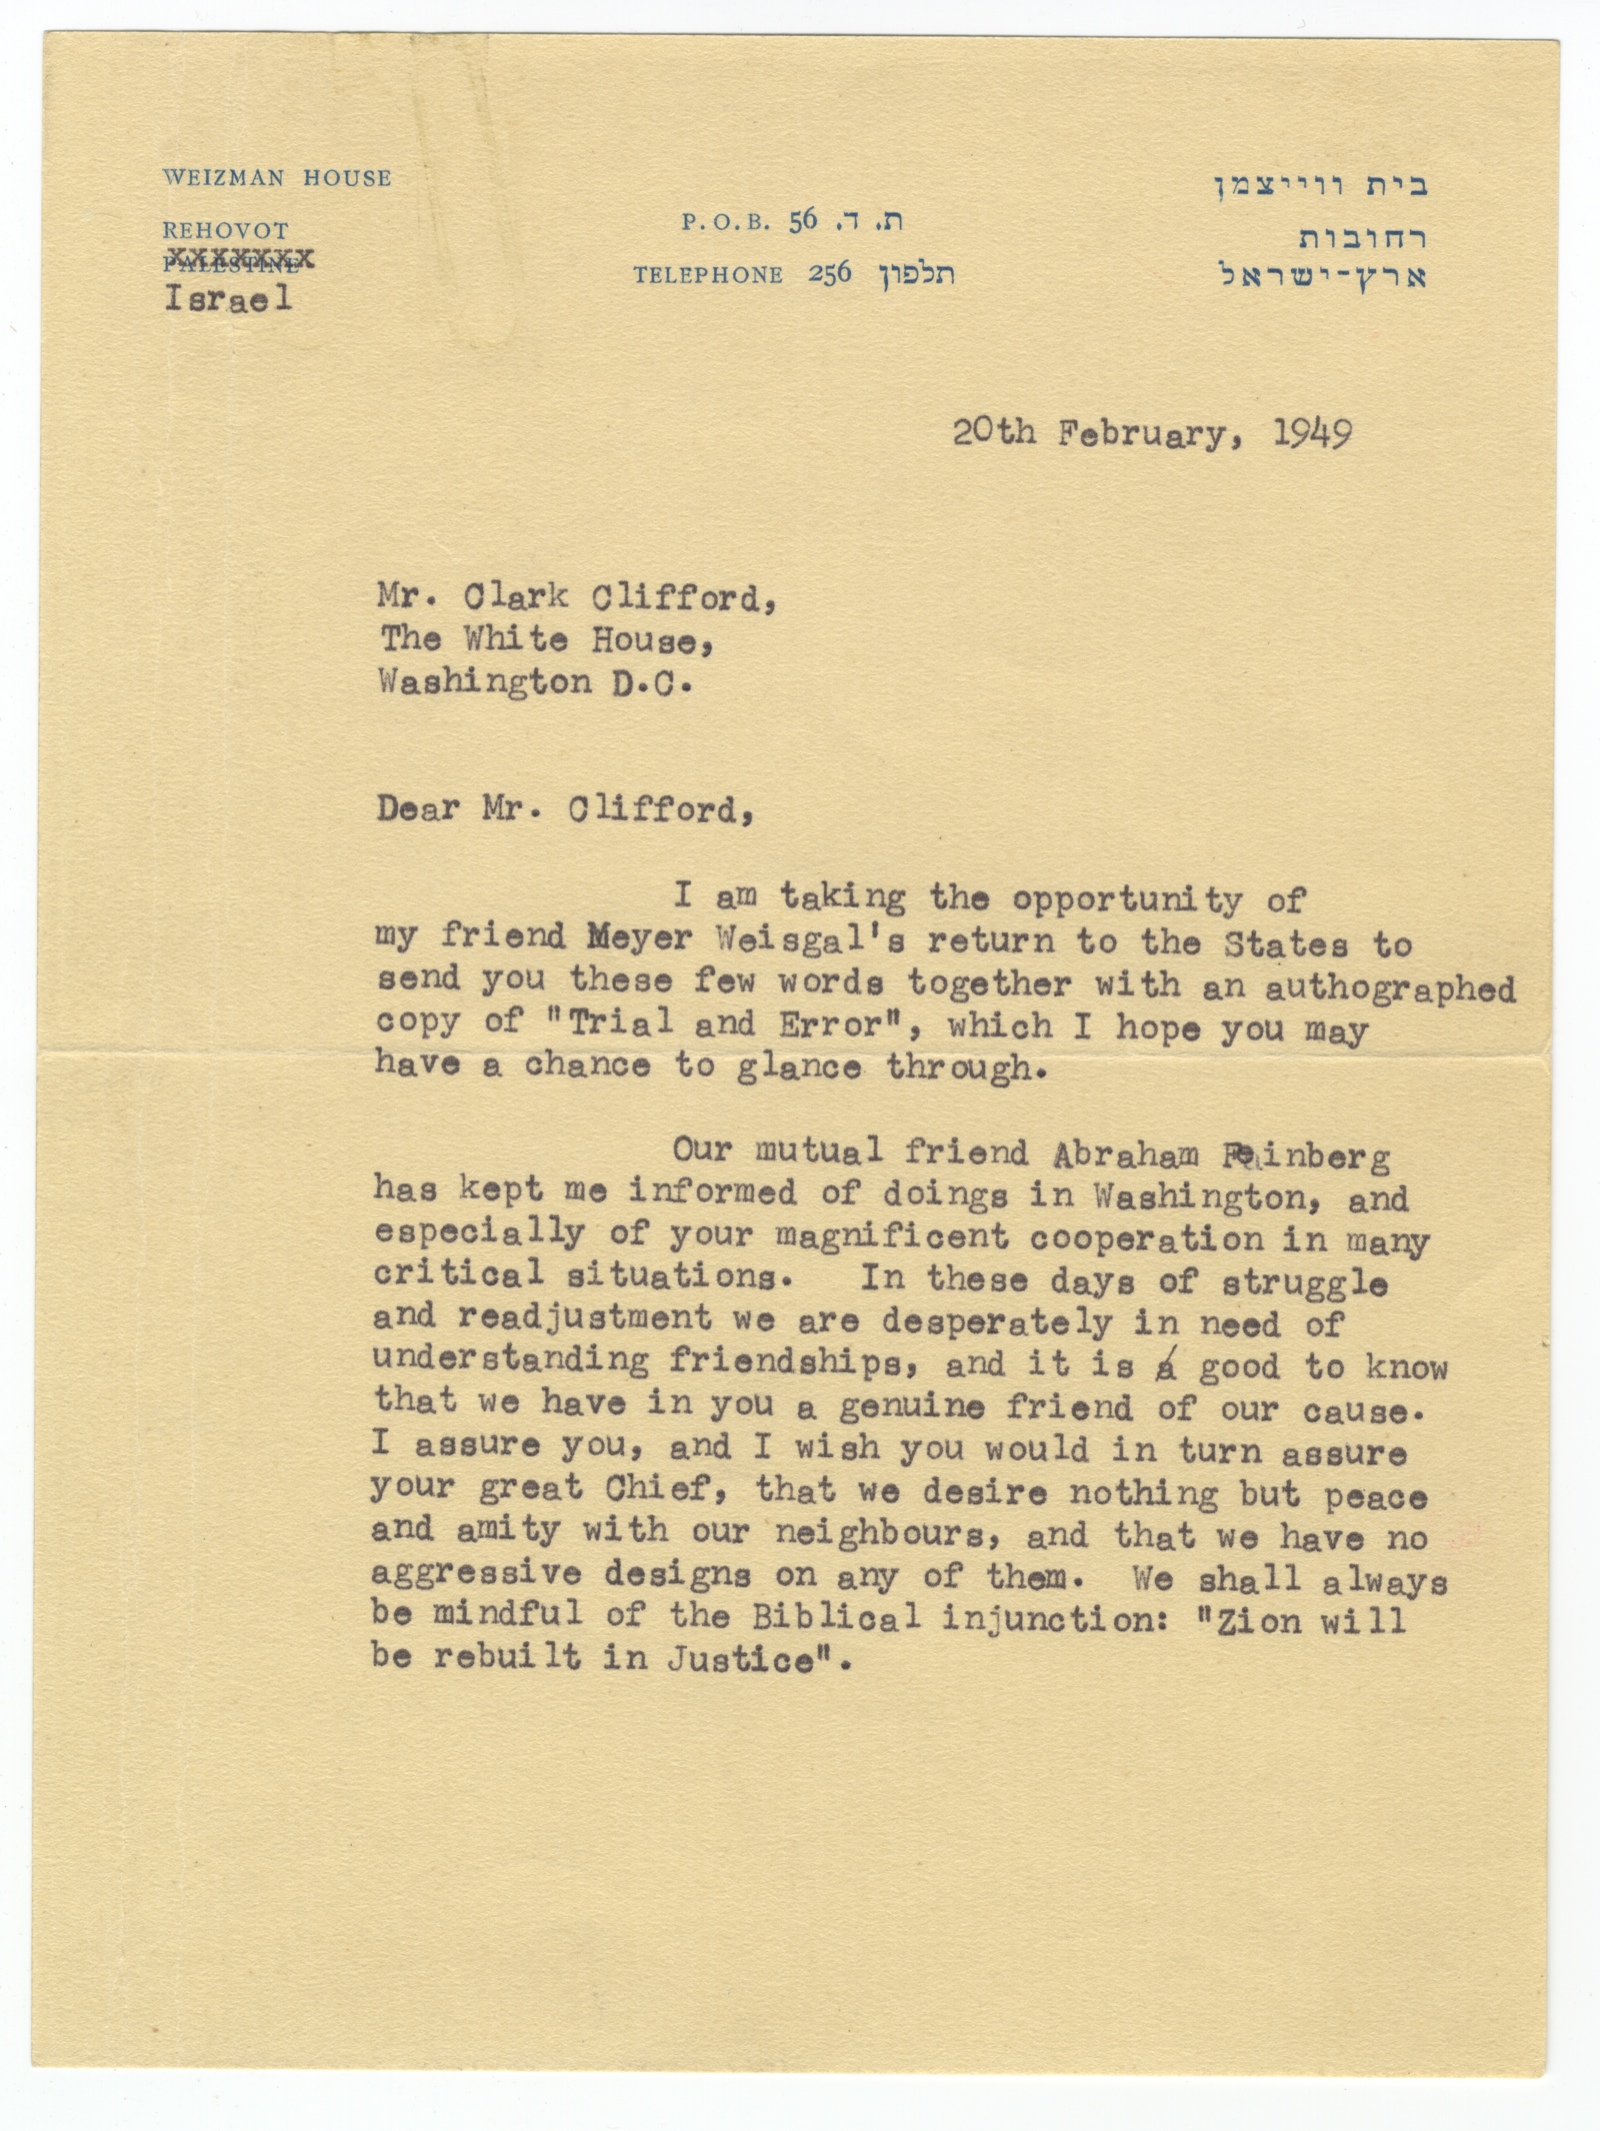 Chaim Weizmann Thanks Clark Clifford for His Help In Getting President Truman to Recognize Israel